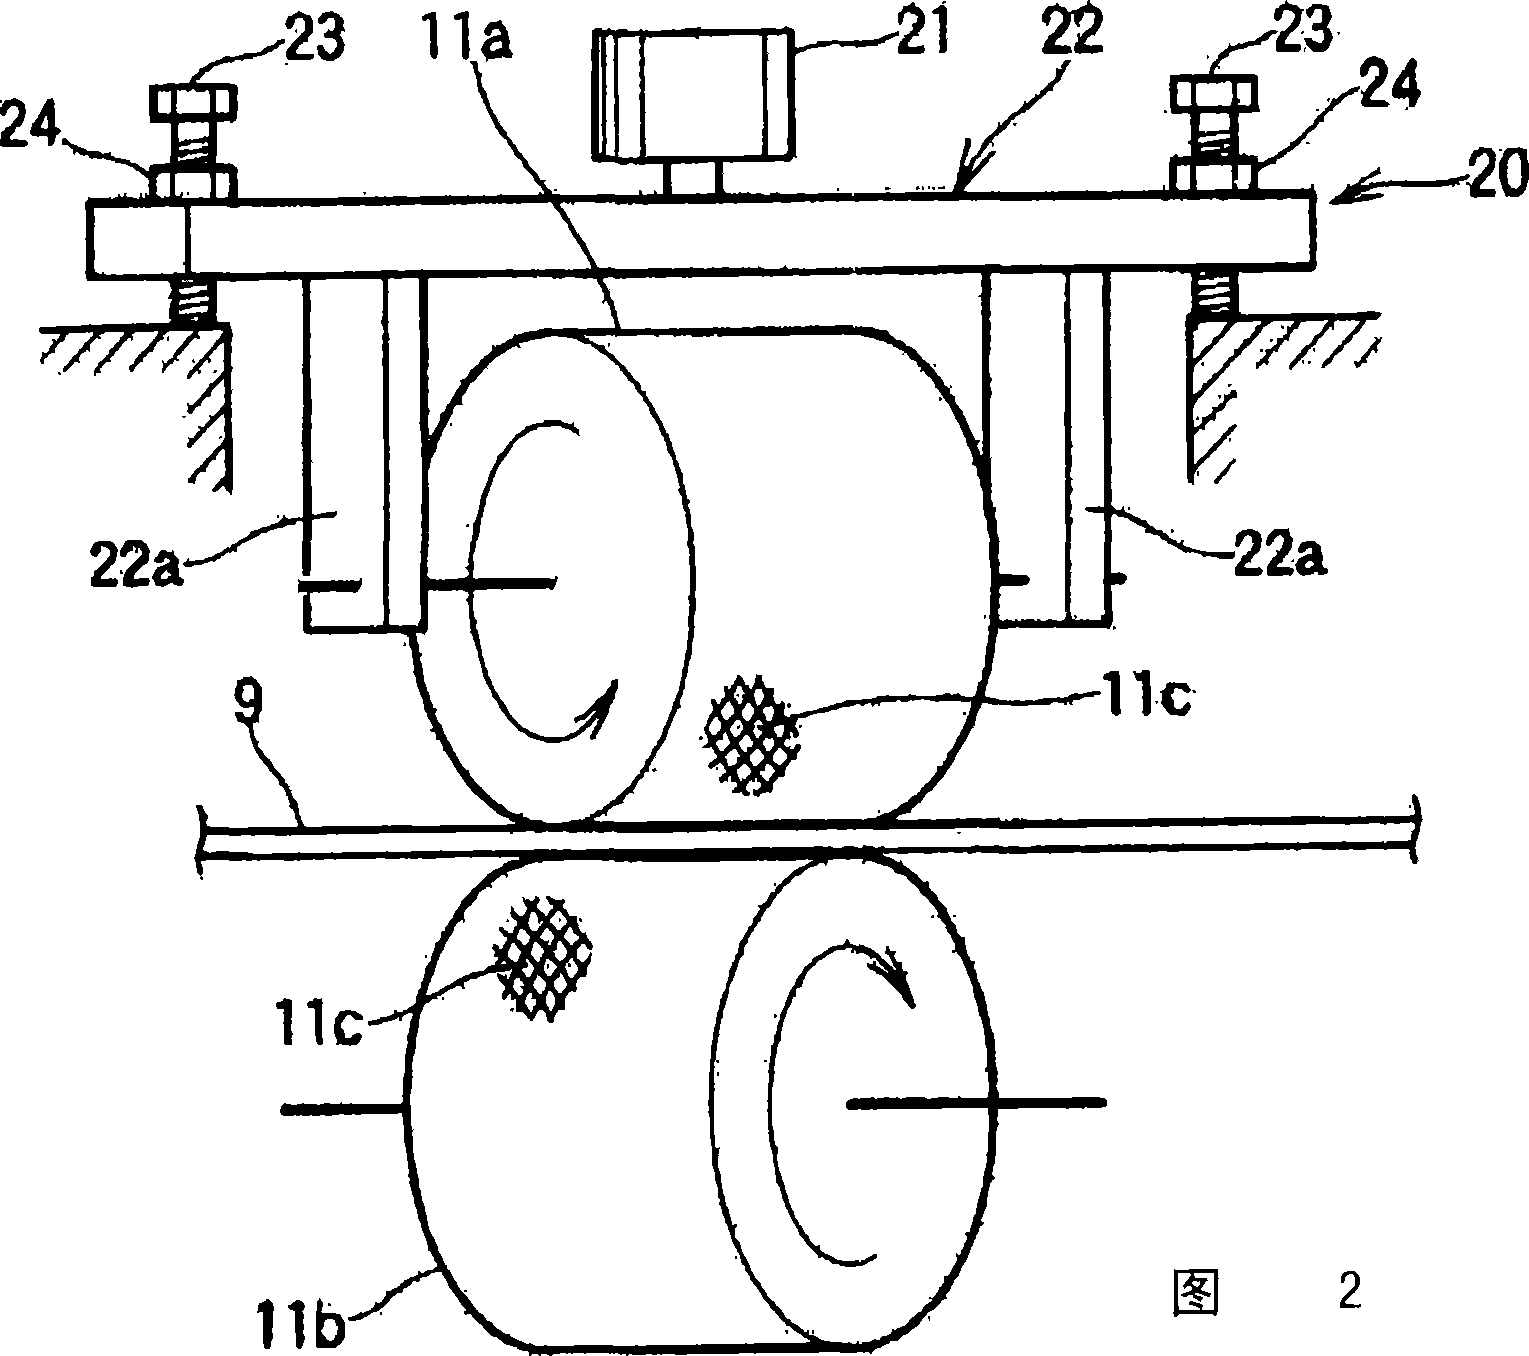 Apparatus for production of fiber-reinforced resin strand